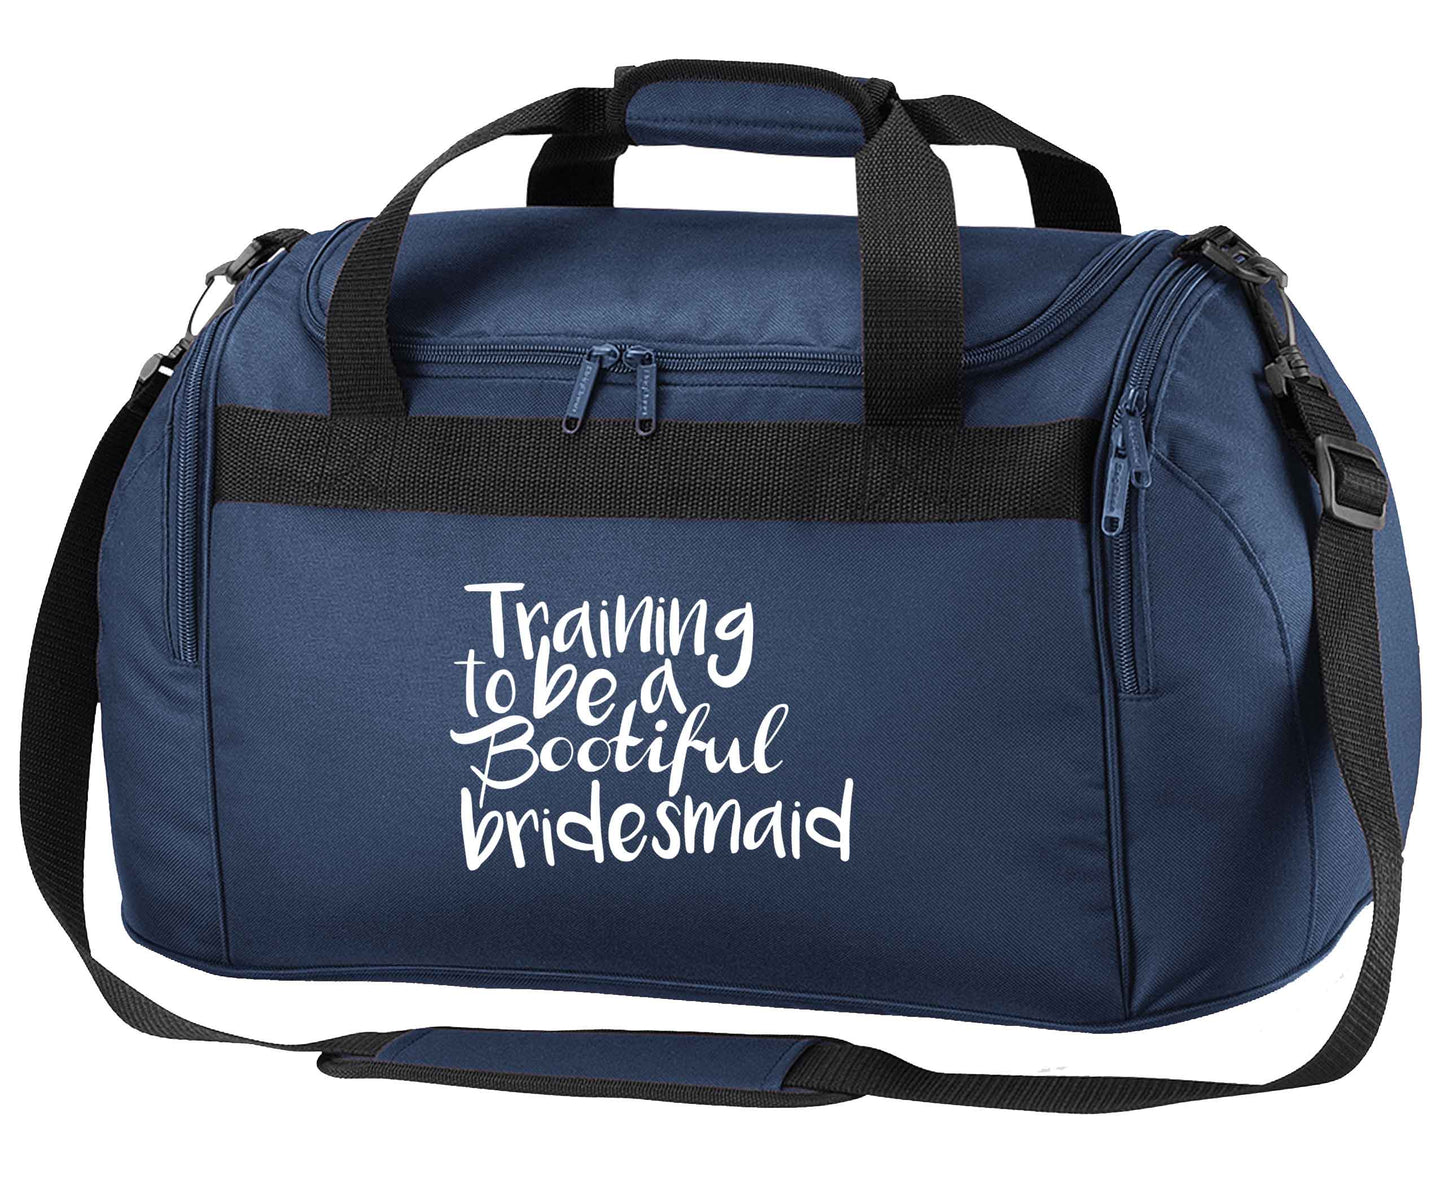 Get motivated and get fit for your big day! Our workout quotes and designs will get you ready to sweat! Perfect for any bride, groom or bridesmaid to be!  navy holdall / duffel bag